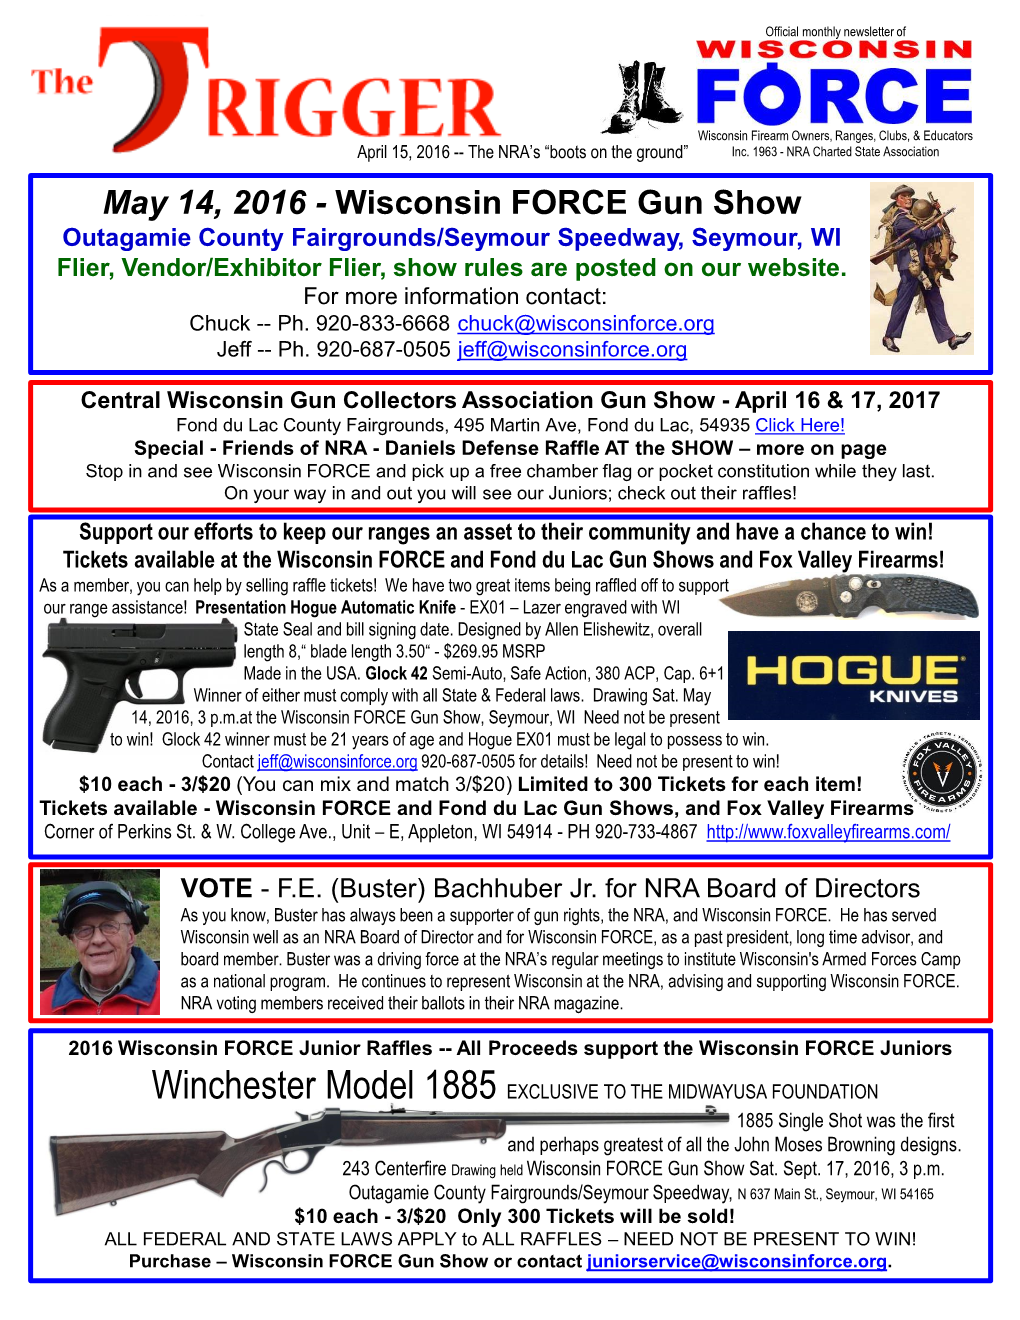 May 14, 2016 - Wisconsin FORCE Gun Show Outagamie County Fairgrounds/Seymour Speedway, Seymour, WI Flier, Vendor/Exhibitor Flier, Show Rules Are Posted on Our Website